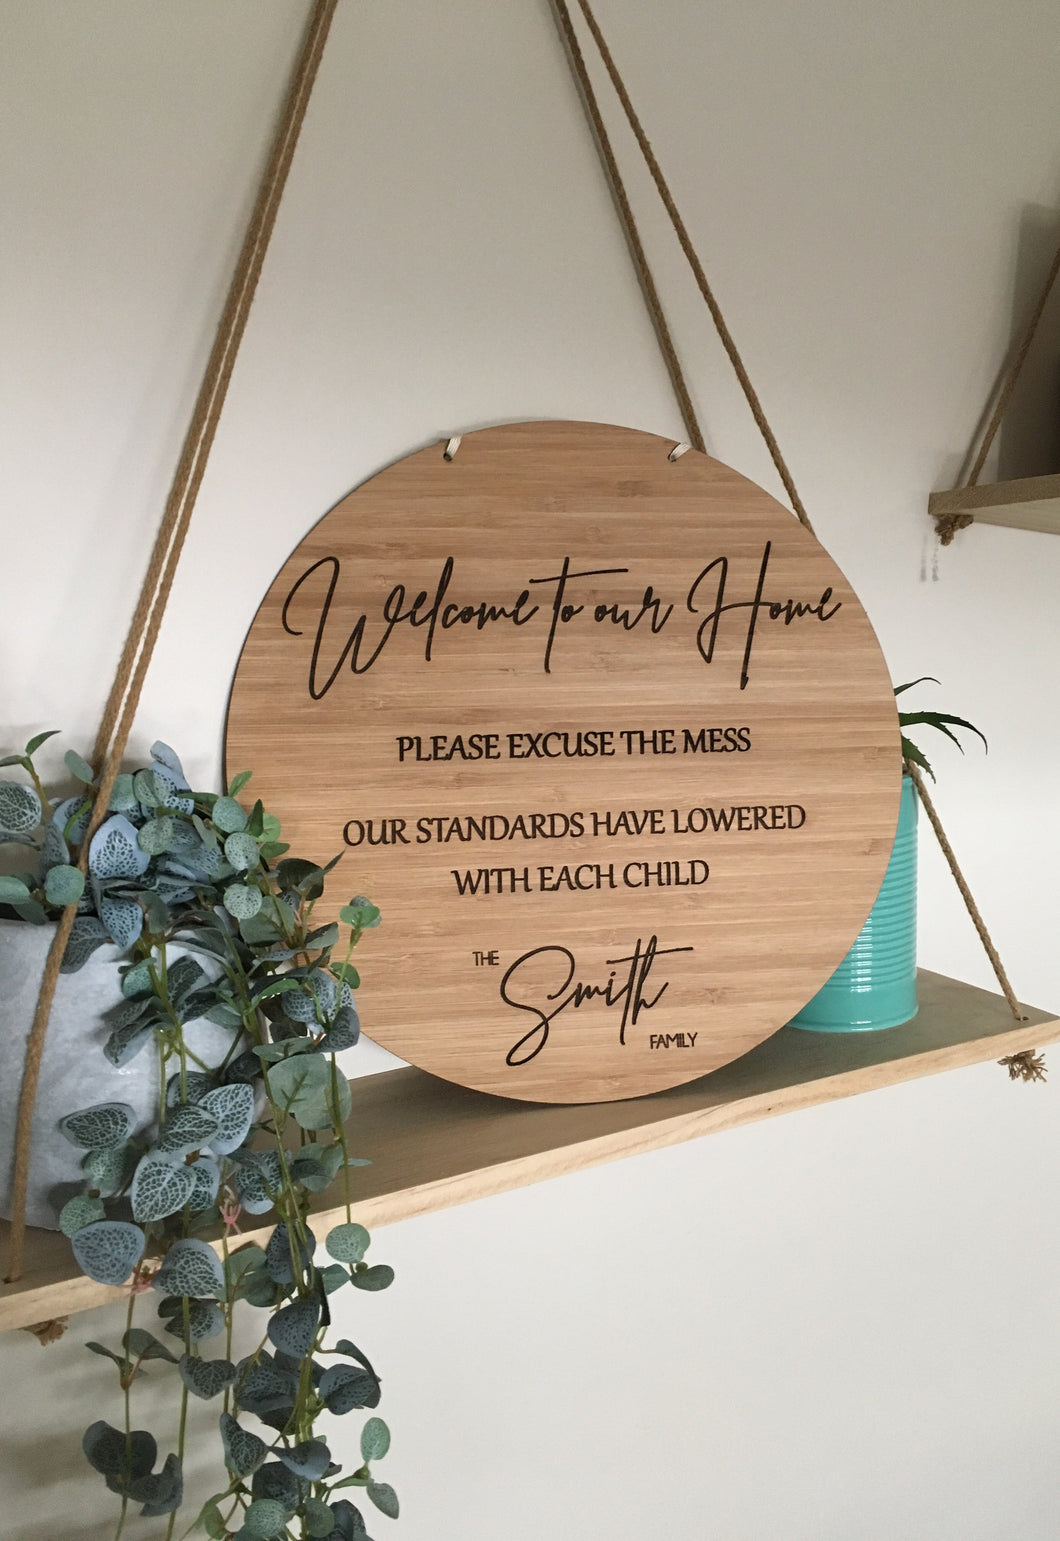 “WELCOME TO OUR HOME - PLEASE EXCUSE THE MESS” PLAQUE